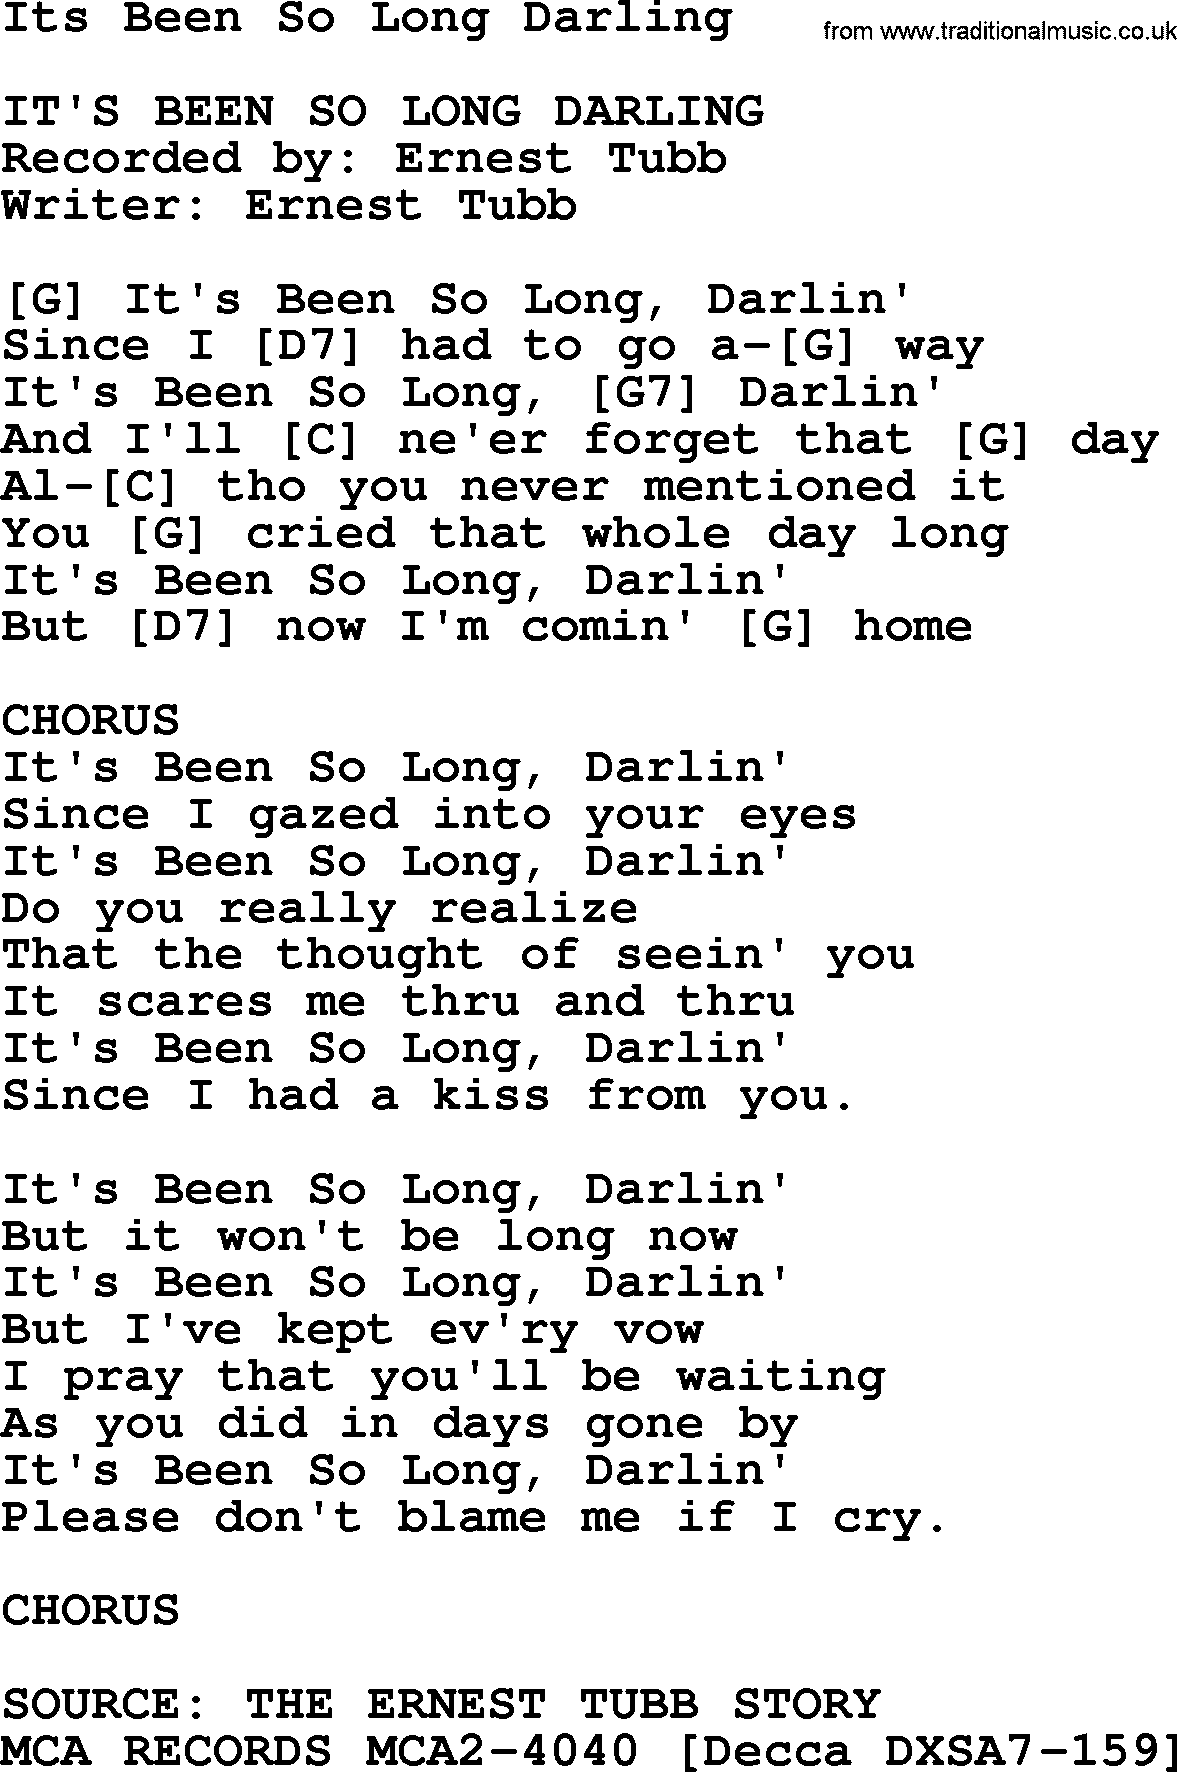 Bluegrass song: Its Been So Long Darling, lyrics and chords